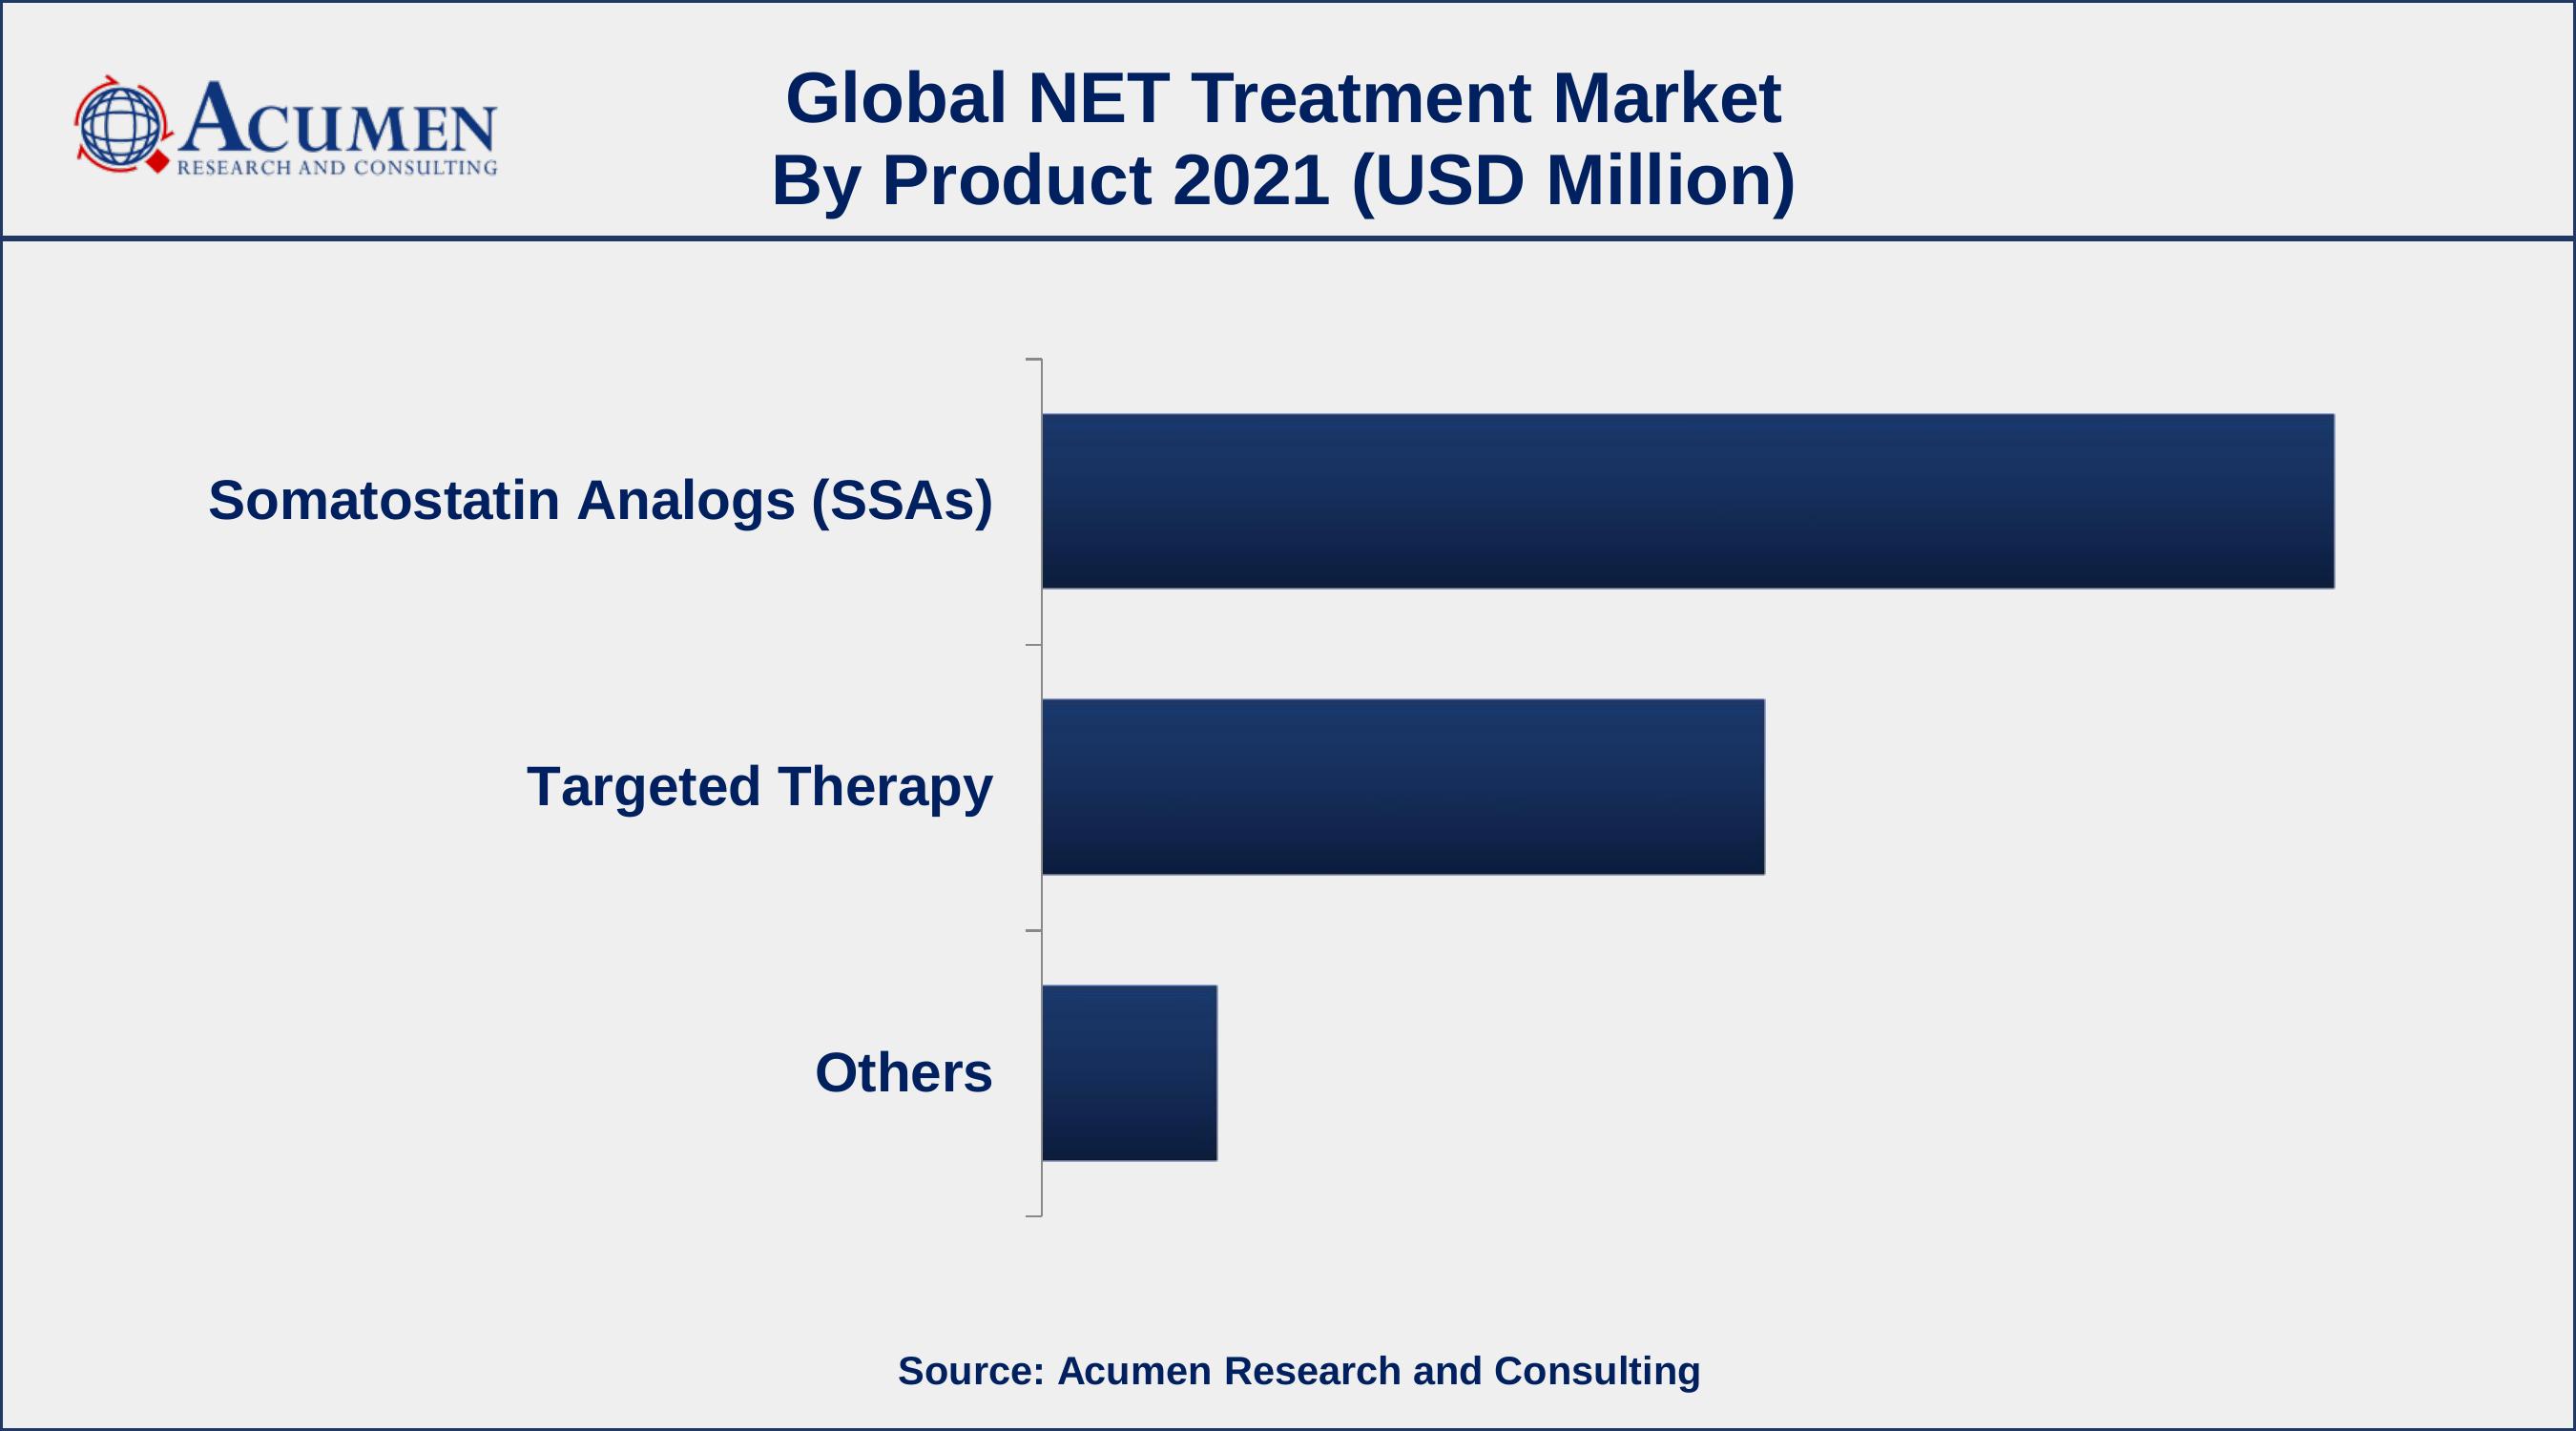 By product, the somatostatin analogs (SSAs) segment has accounted market share of over 54% in 2021